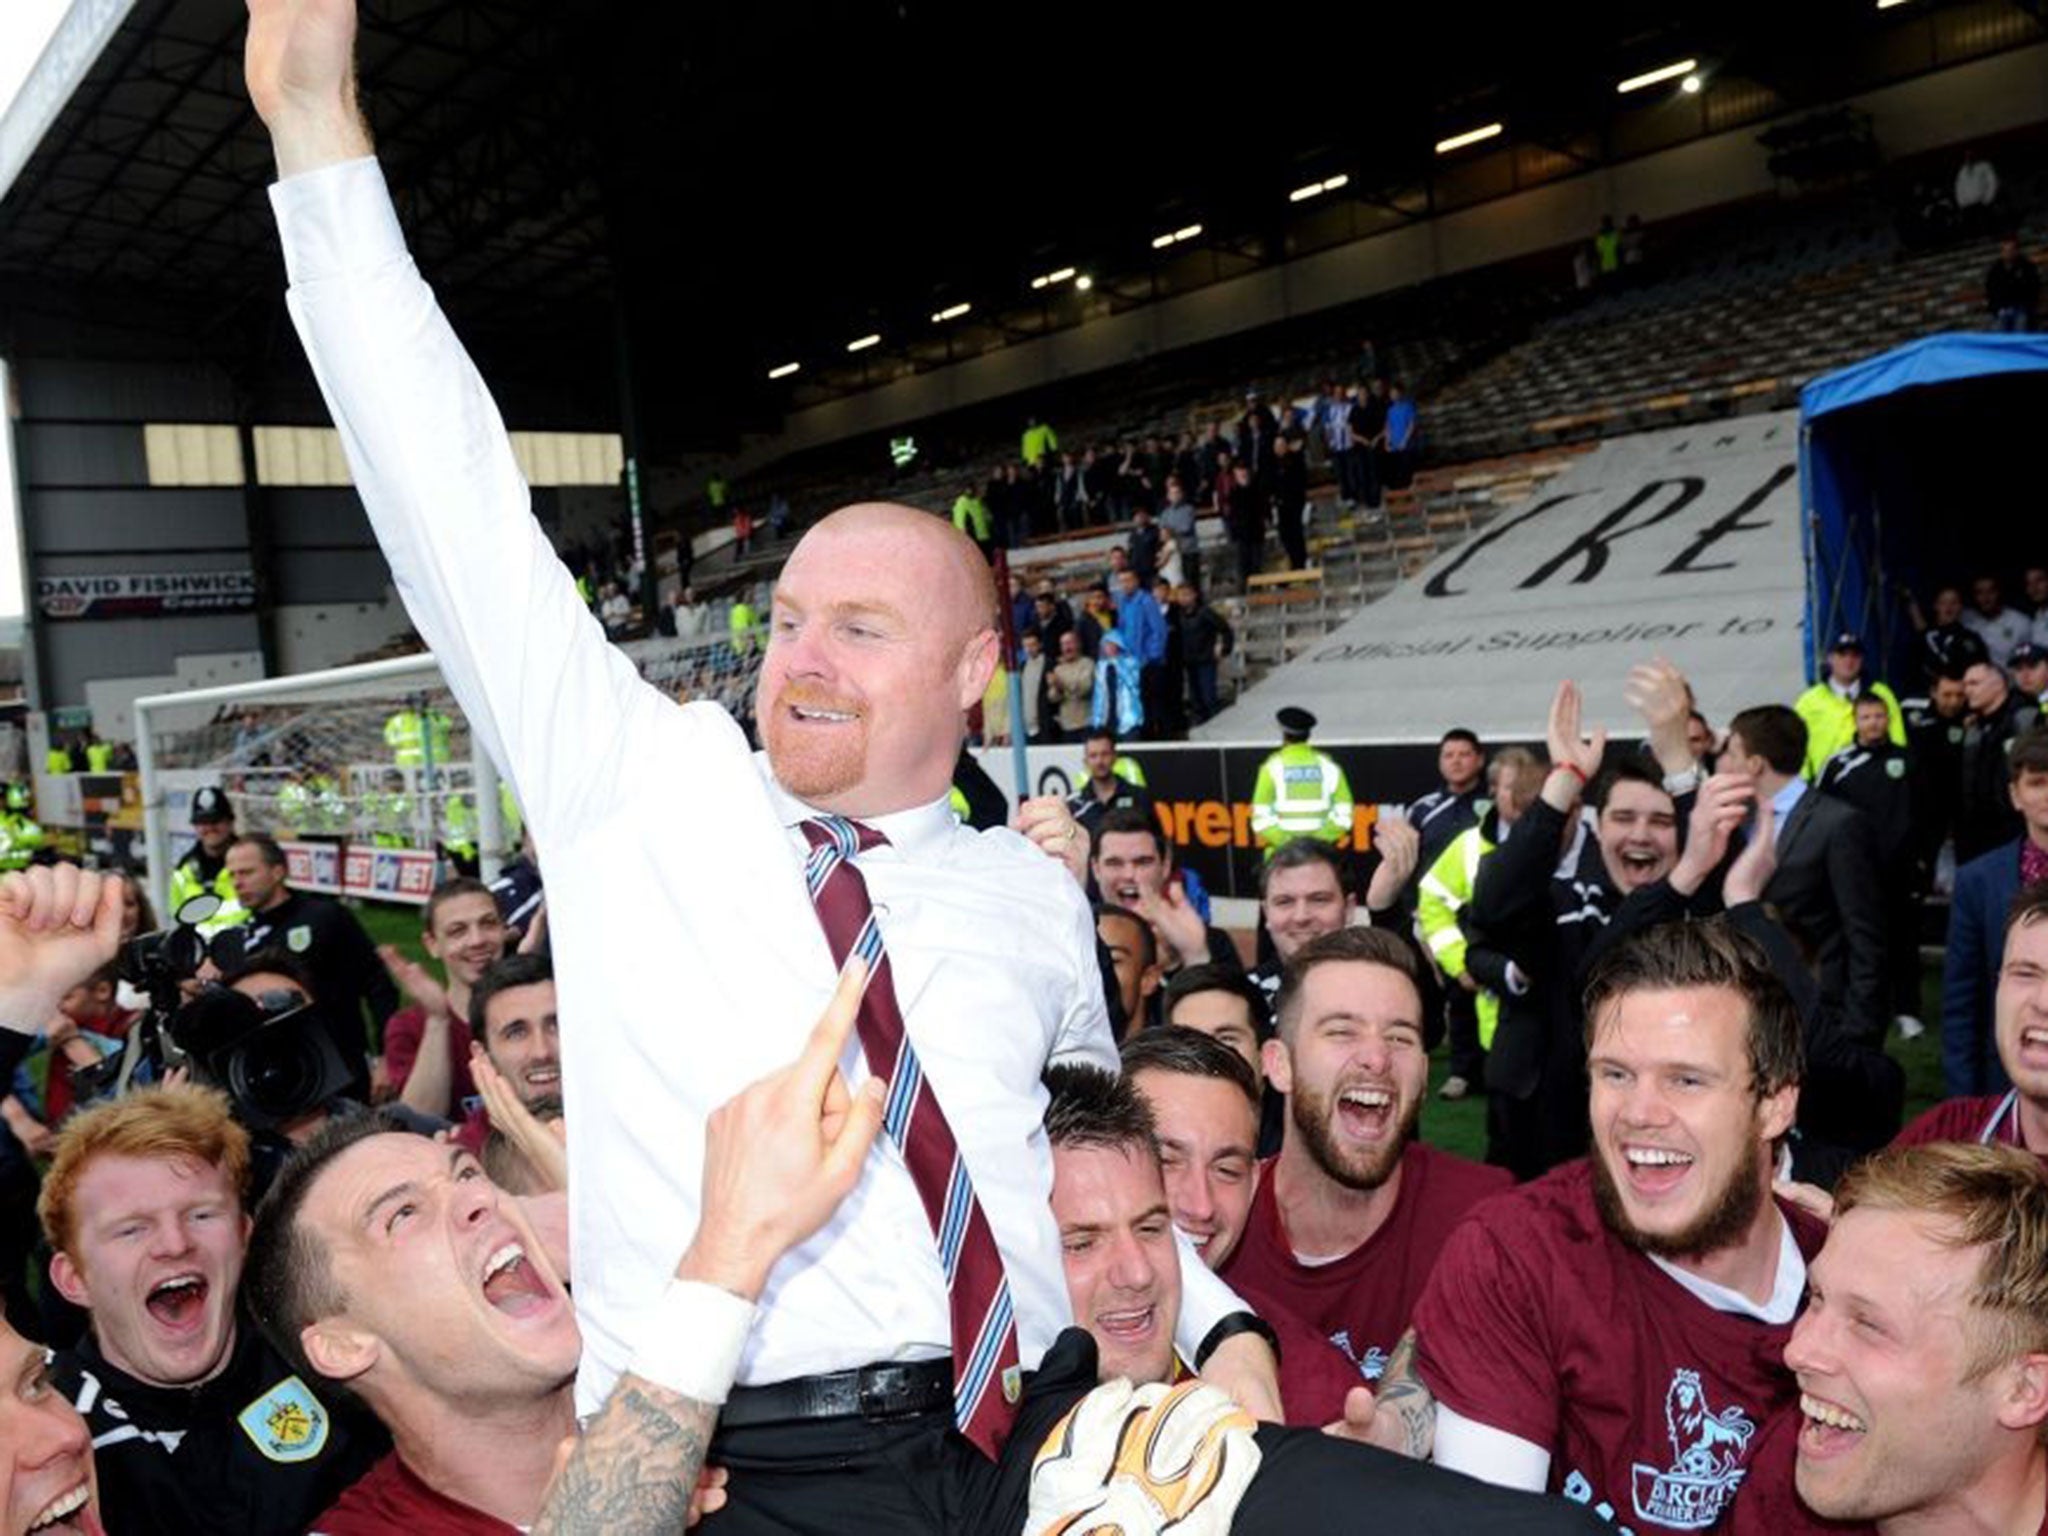 Burnley's manager Sean Dyche celebrates after his side win promotion to the English Premier League during their championship match at Turf Moor, Burnley England